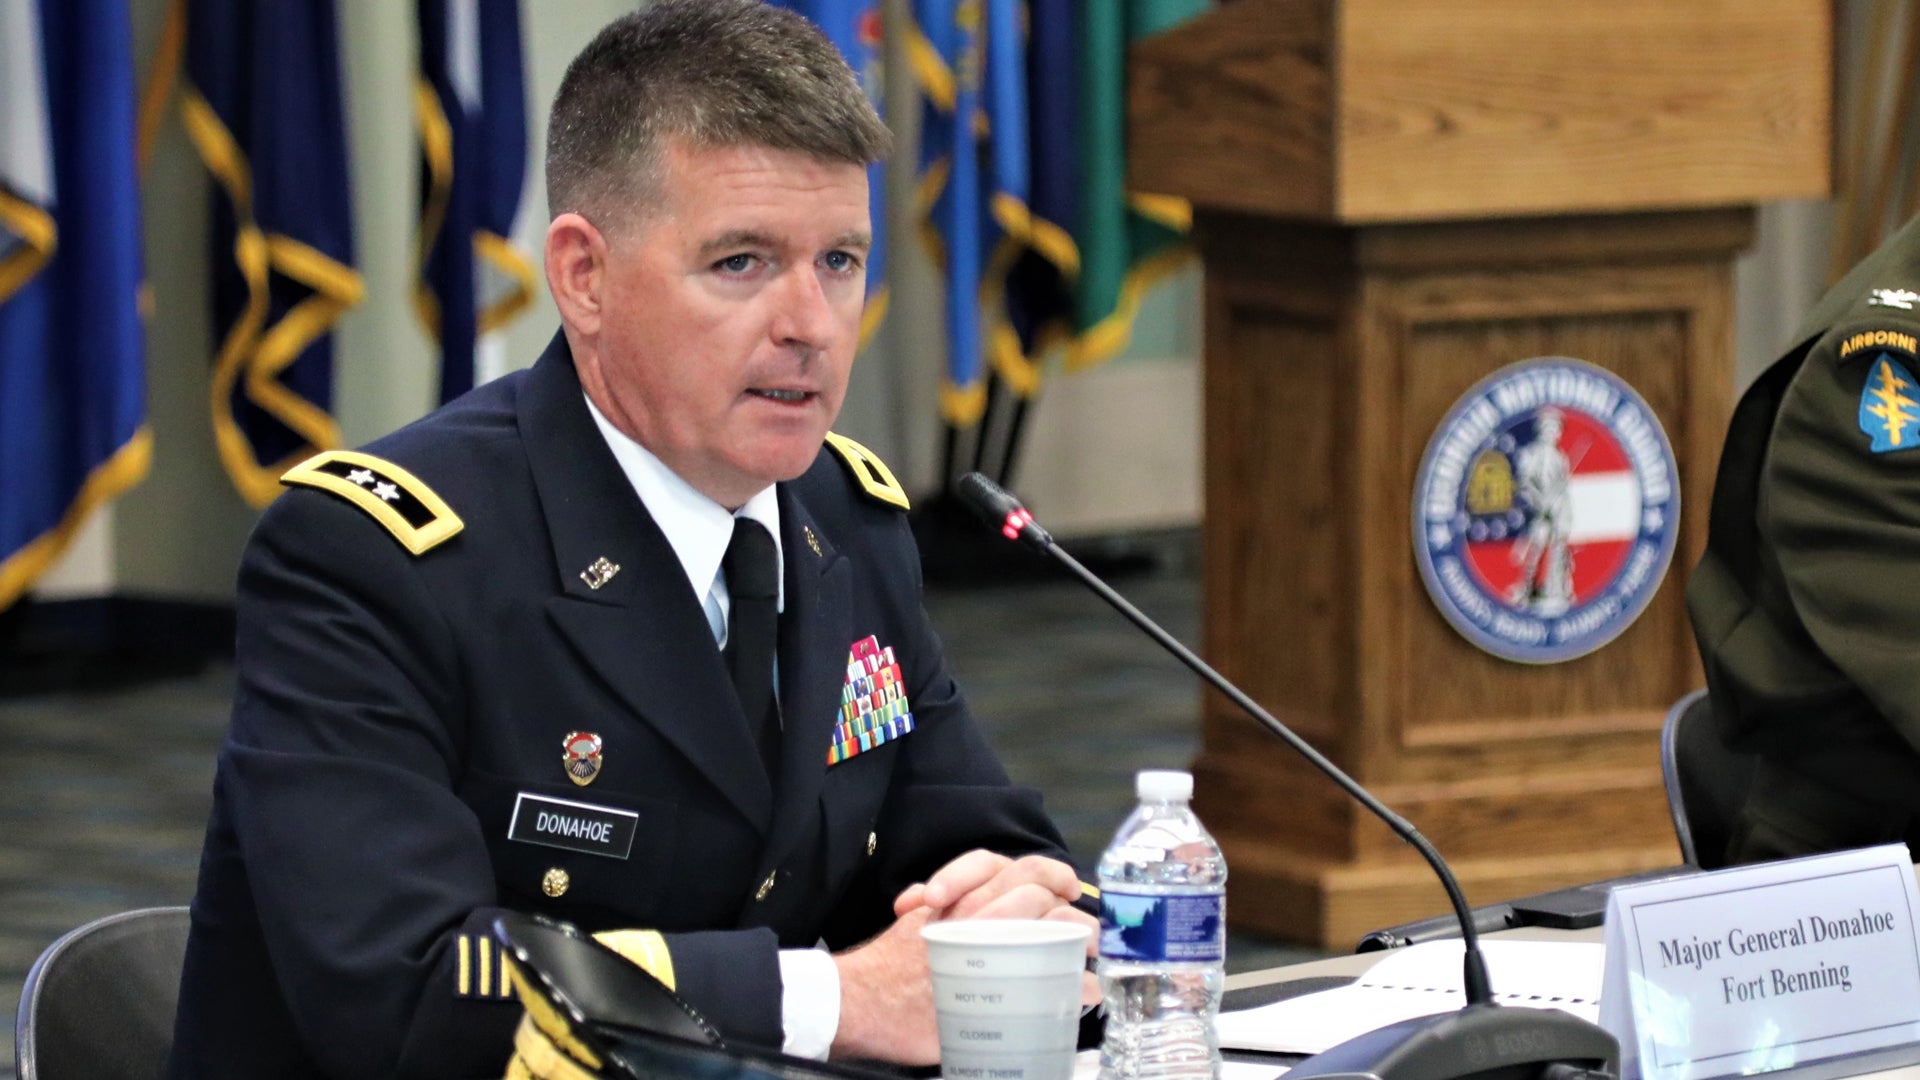 Army Secretary tells leaders to stand up for soldiers ‘IRL or online’ after telling them to stay out of ‘culture wars’